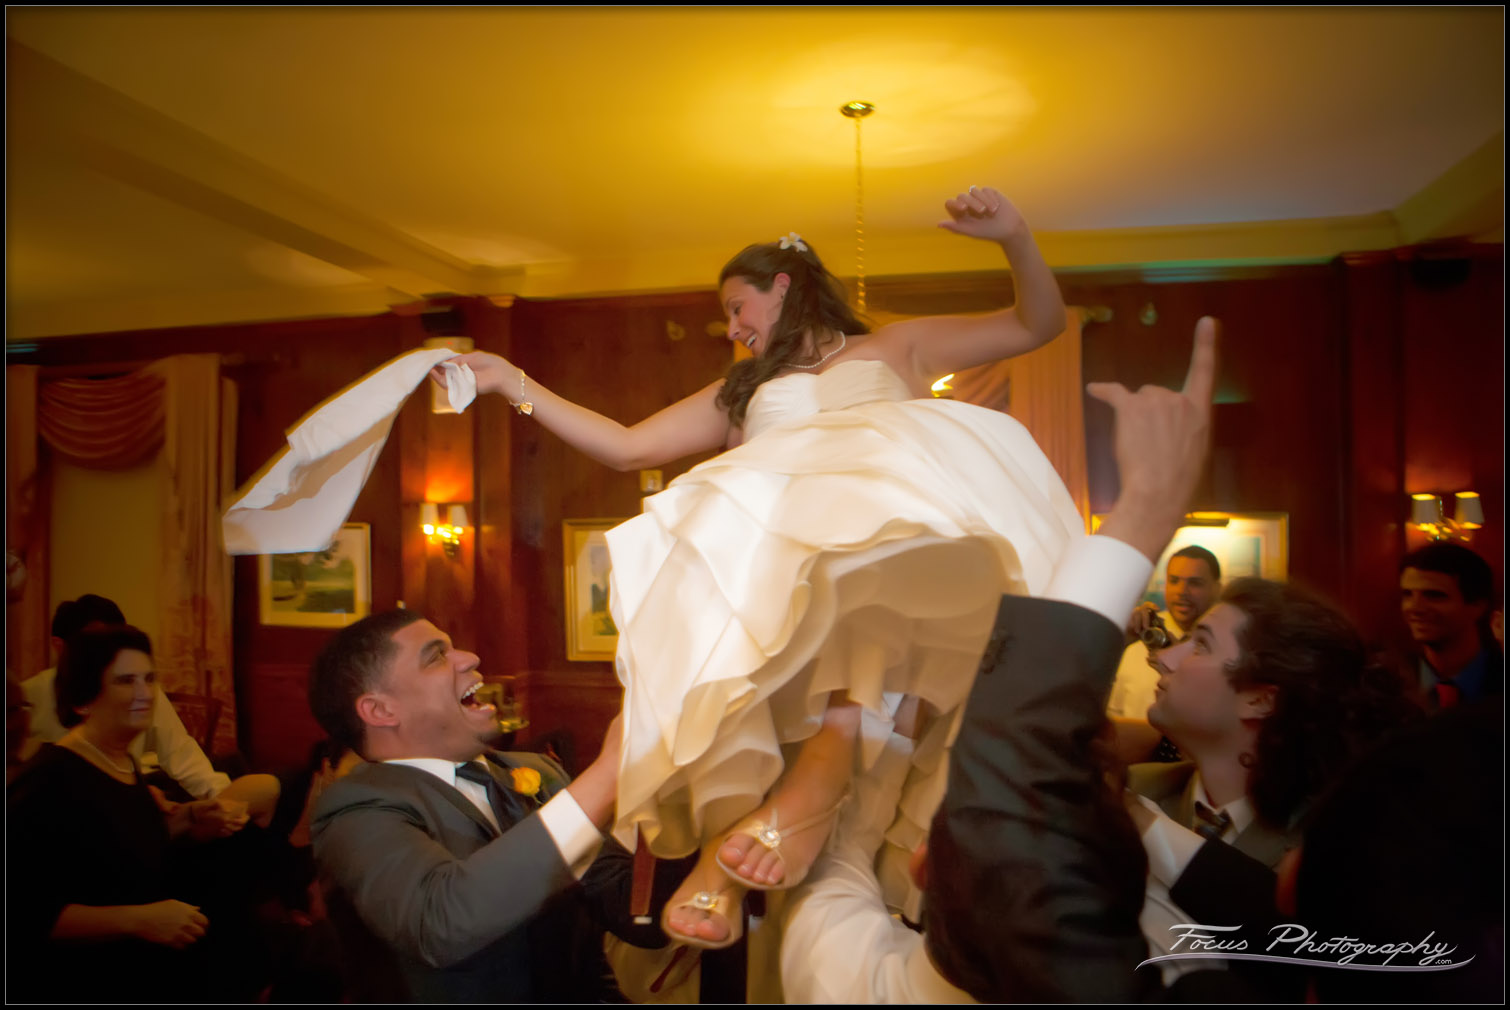 bride lifted during dance at wedding reception at Maine's Colony Hotel